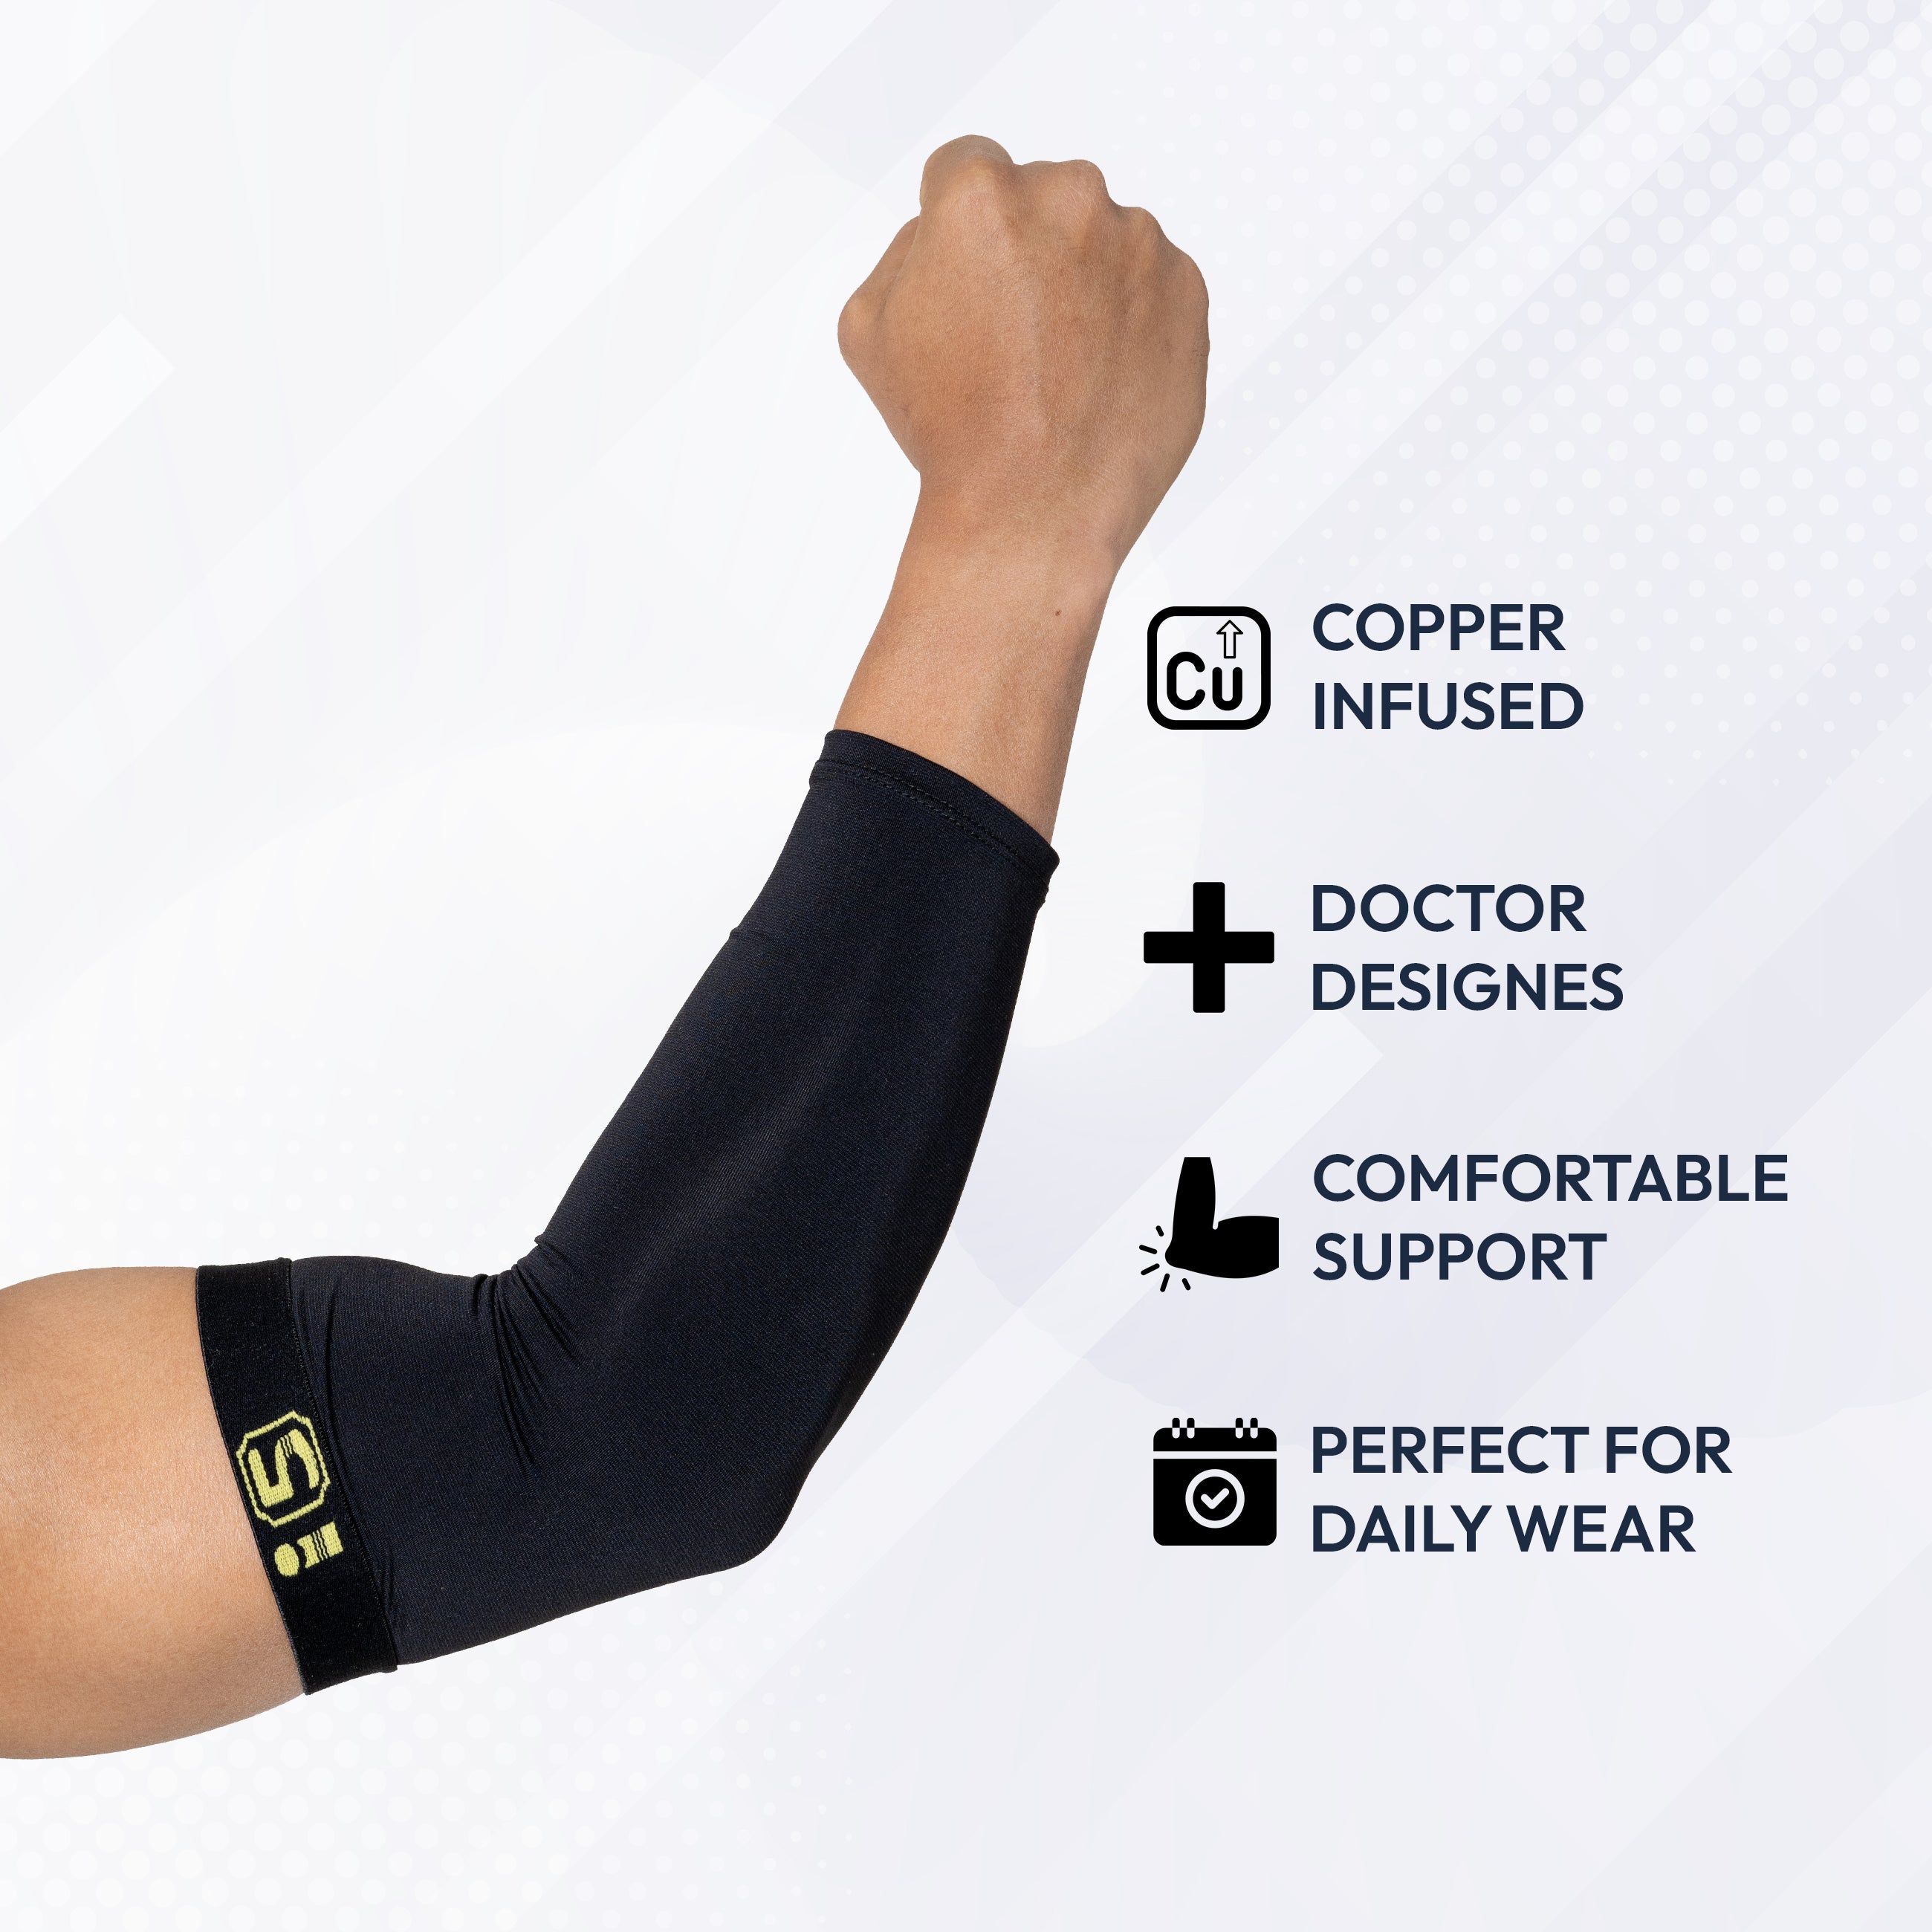 I5Joints-Cooper Compression Elbow Support(Elbow Compression Cap For Men & Women|Workout, Gym, Pain Relief, Quick Recovery, Tennis, Golf, Gym Fitness, Volleyball, Cricket| Prevent Injuries|Single Pair))